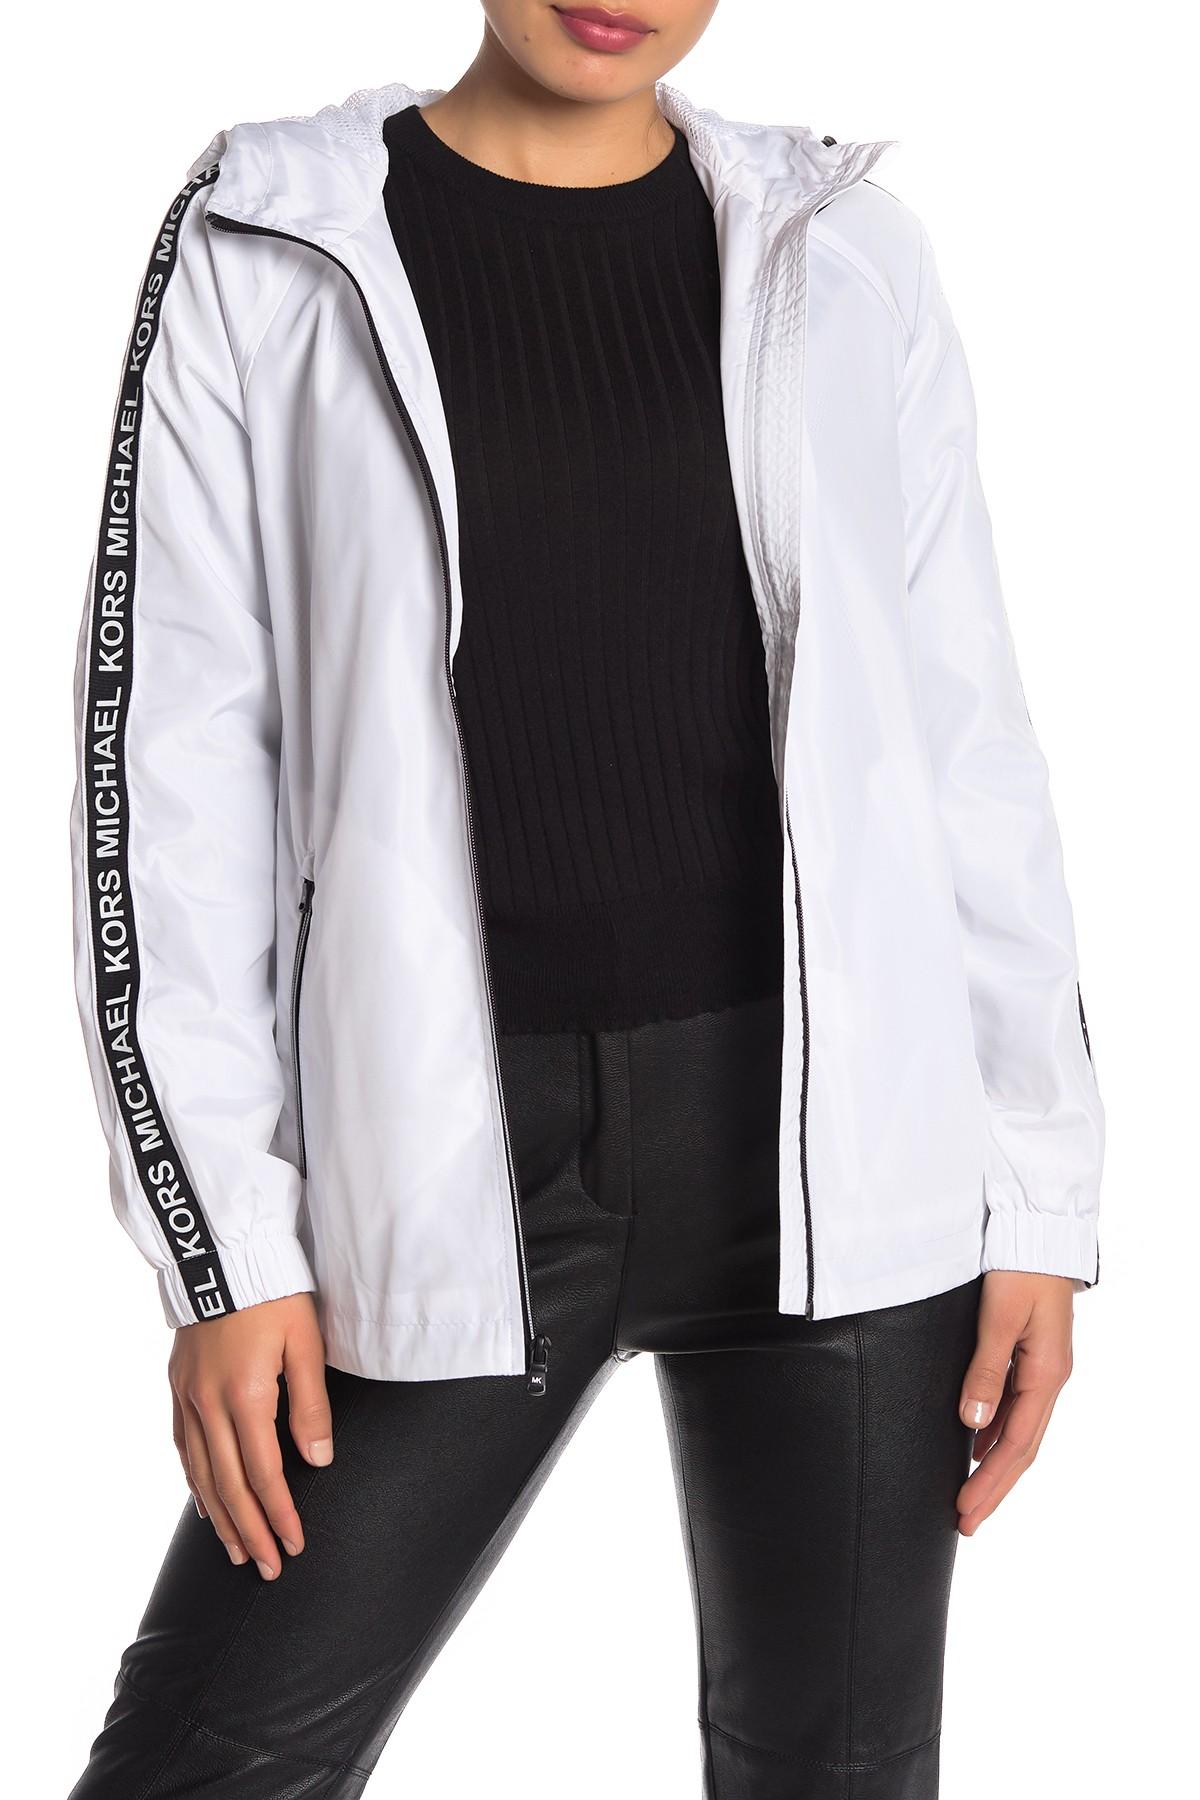 MICHAEL Michael Kors Synthetic Sleeve Tape Logo Jacket in White - Lyst